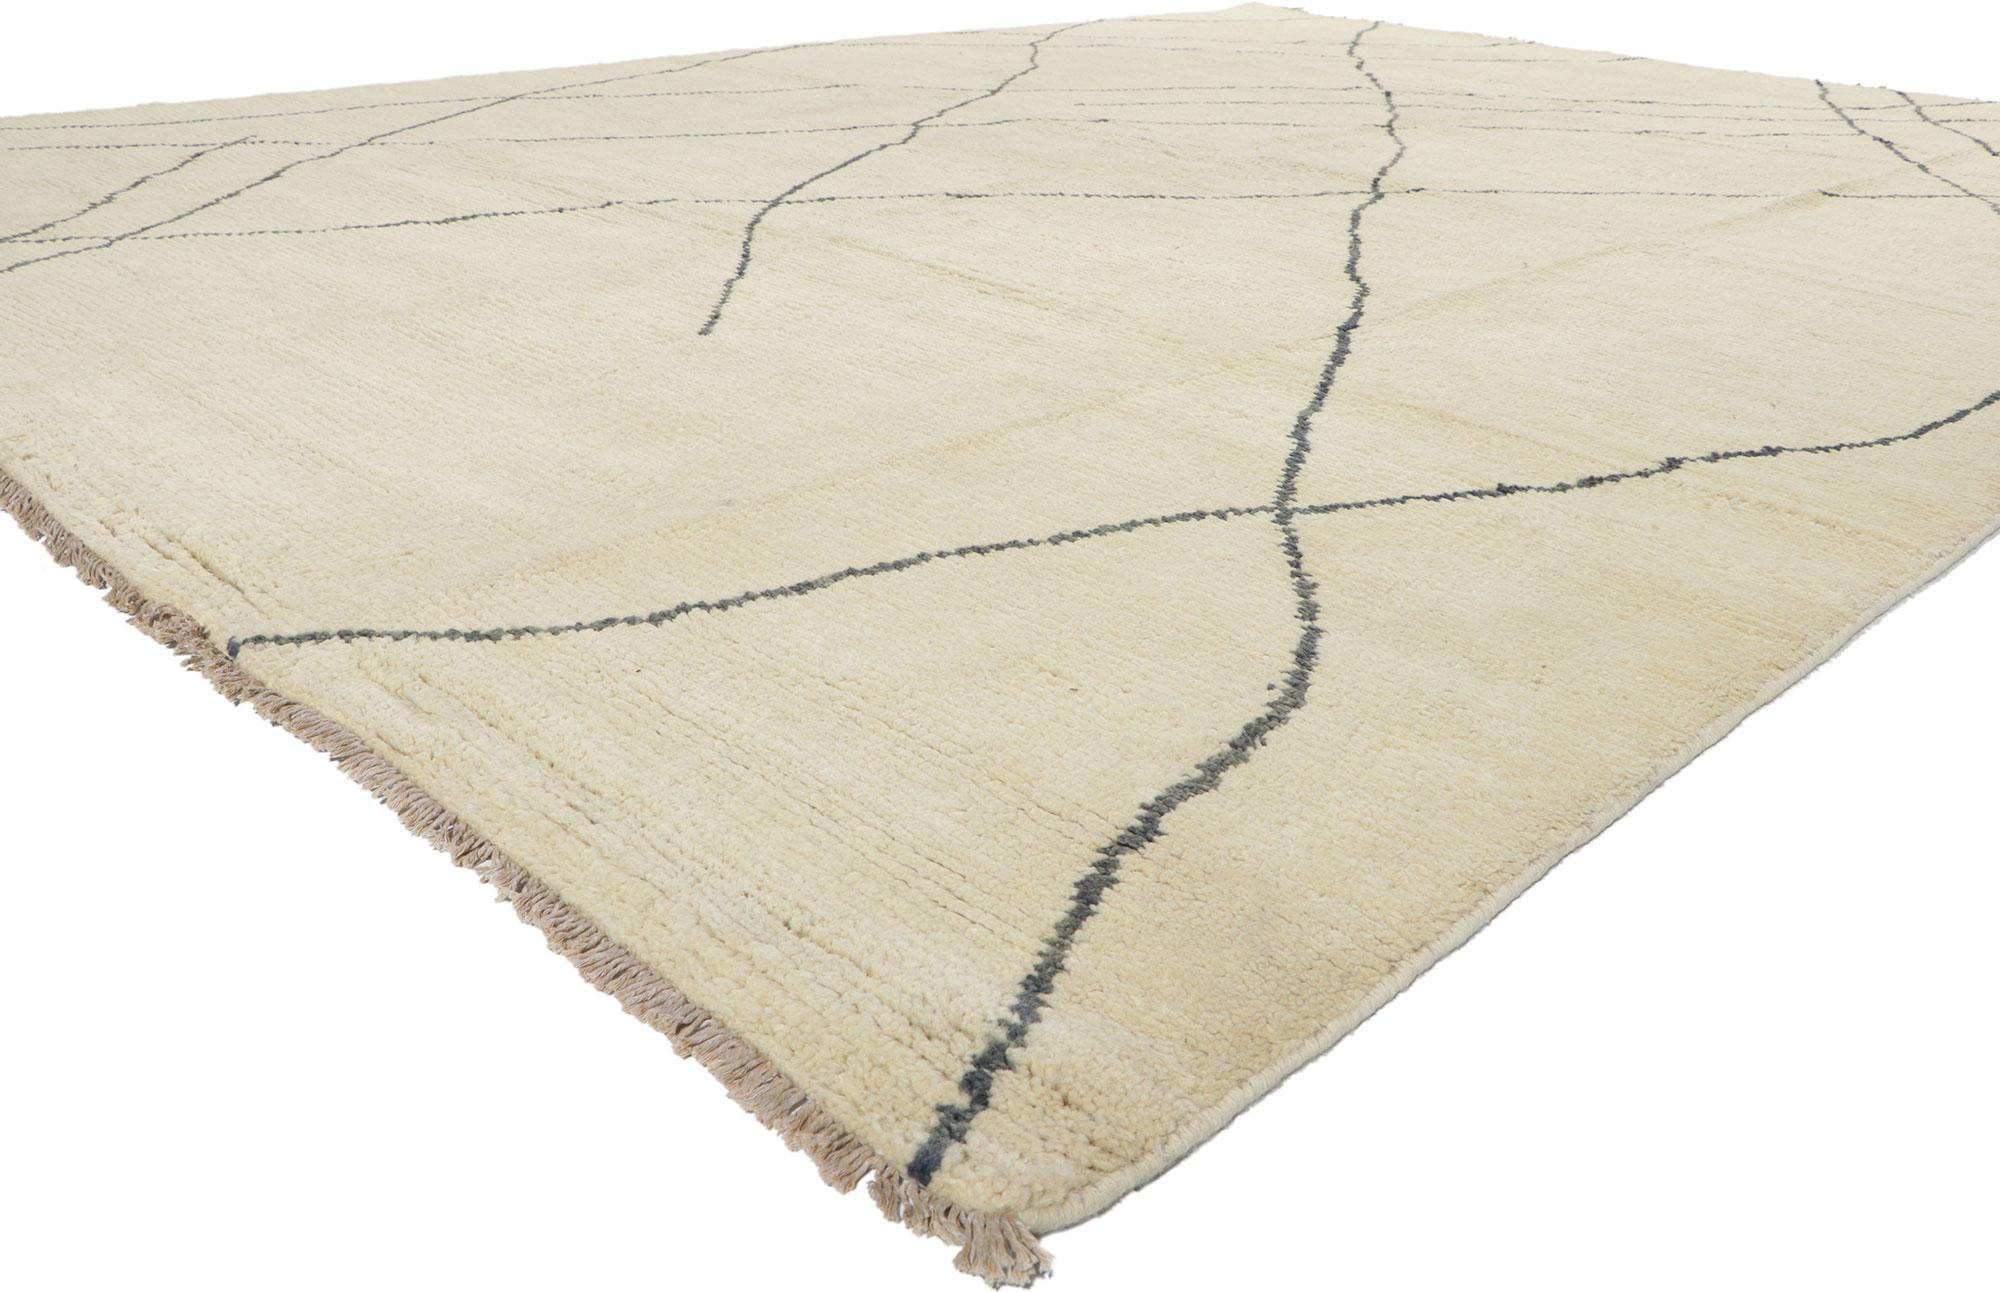 80698 New Contemporary Moroccan Rug with Modern Style 09'07 x 13'01. With its simplicity, incredible detail and texture, this hand knotted wool contemporary Moroccan rug is a captivating vision of woven beauty. The abrashed beige field features a